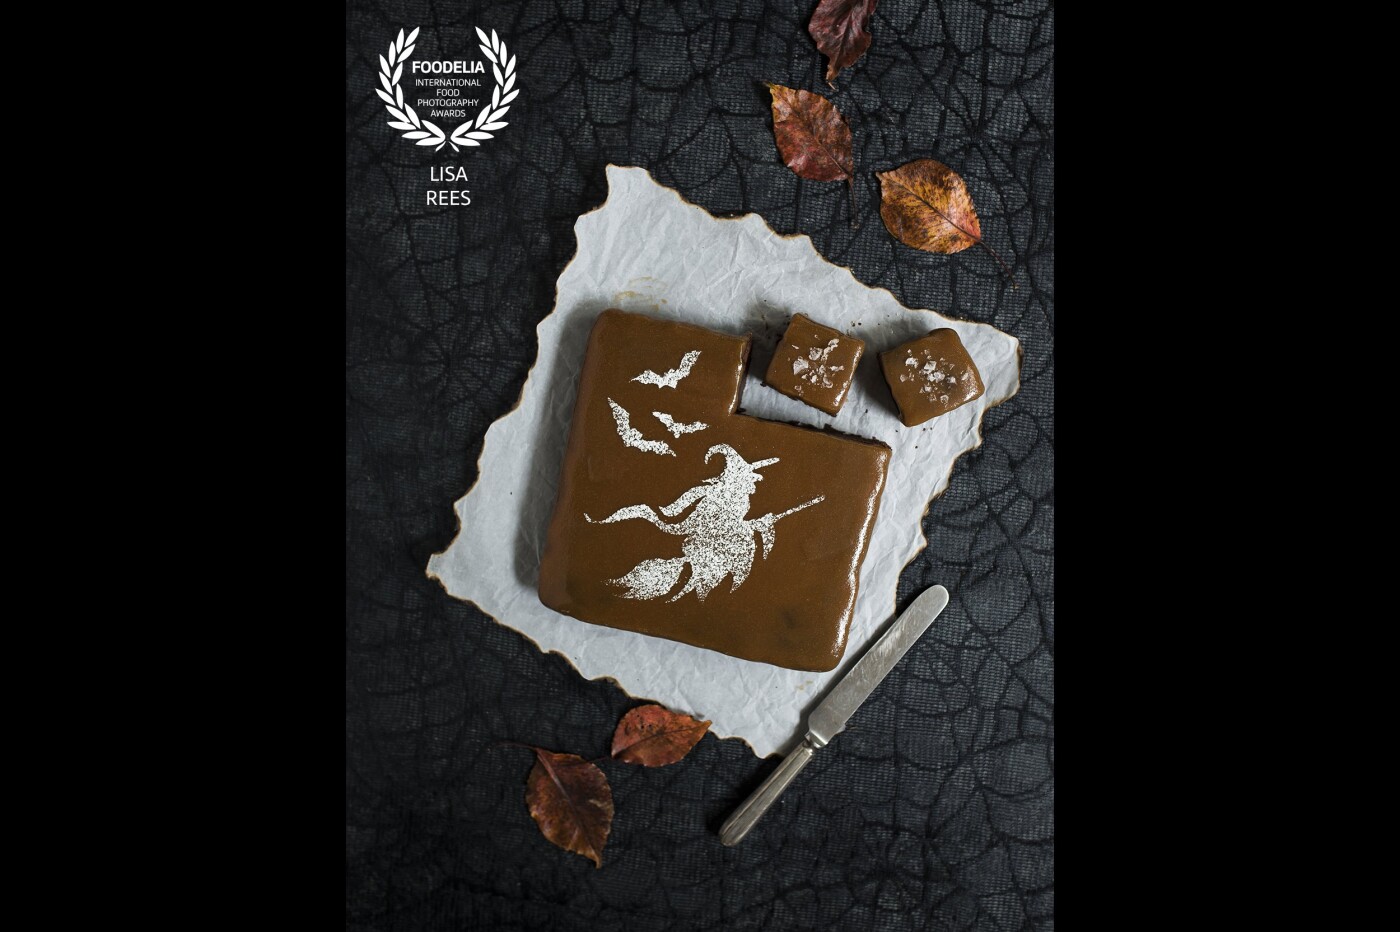 This salted caramel fudge brownies was created in celebration of Halloween.  The fun part in making it was to make the stencil for the witch on the broom and the bats.  The burned edges of the parchment paper and the lacy background help to pull the elements together to convey that sense of bewitching yumminess.